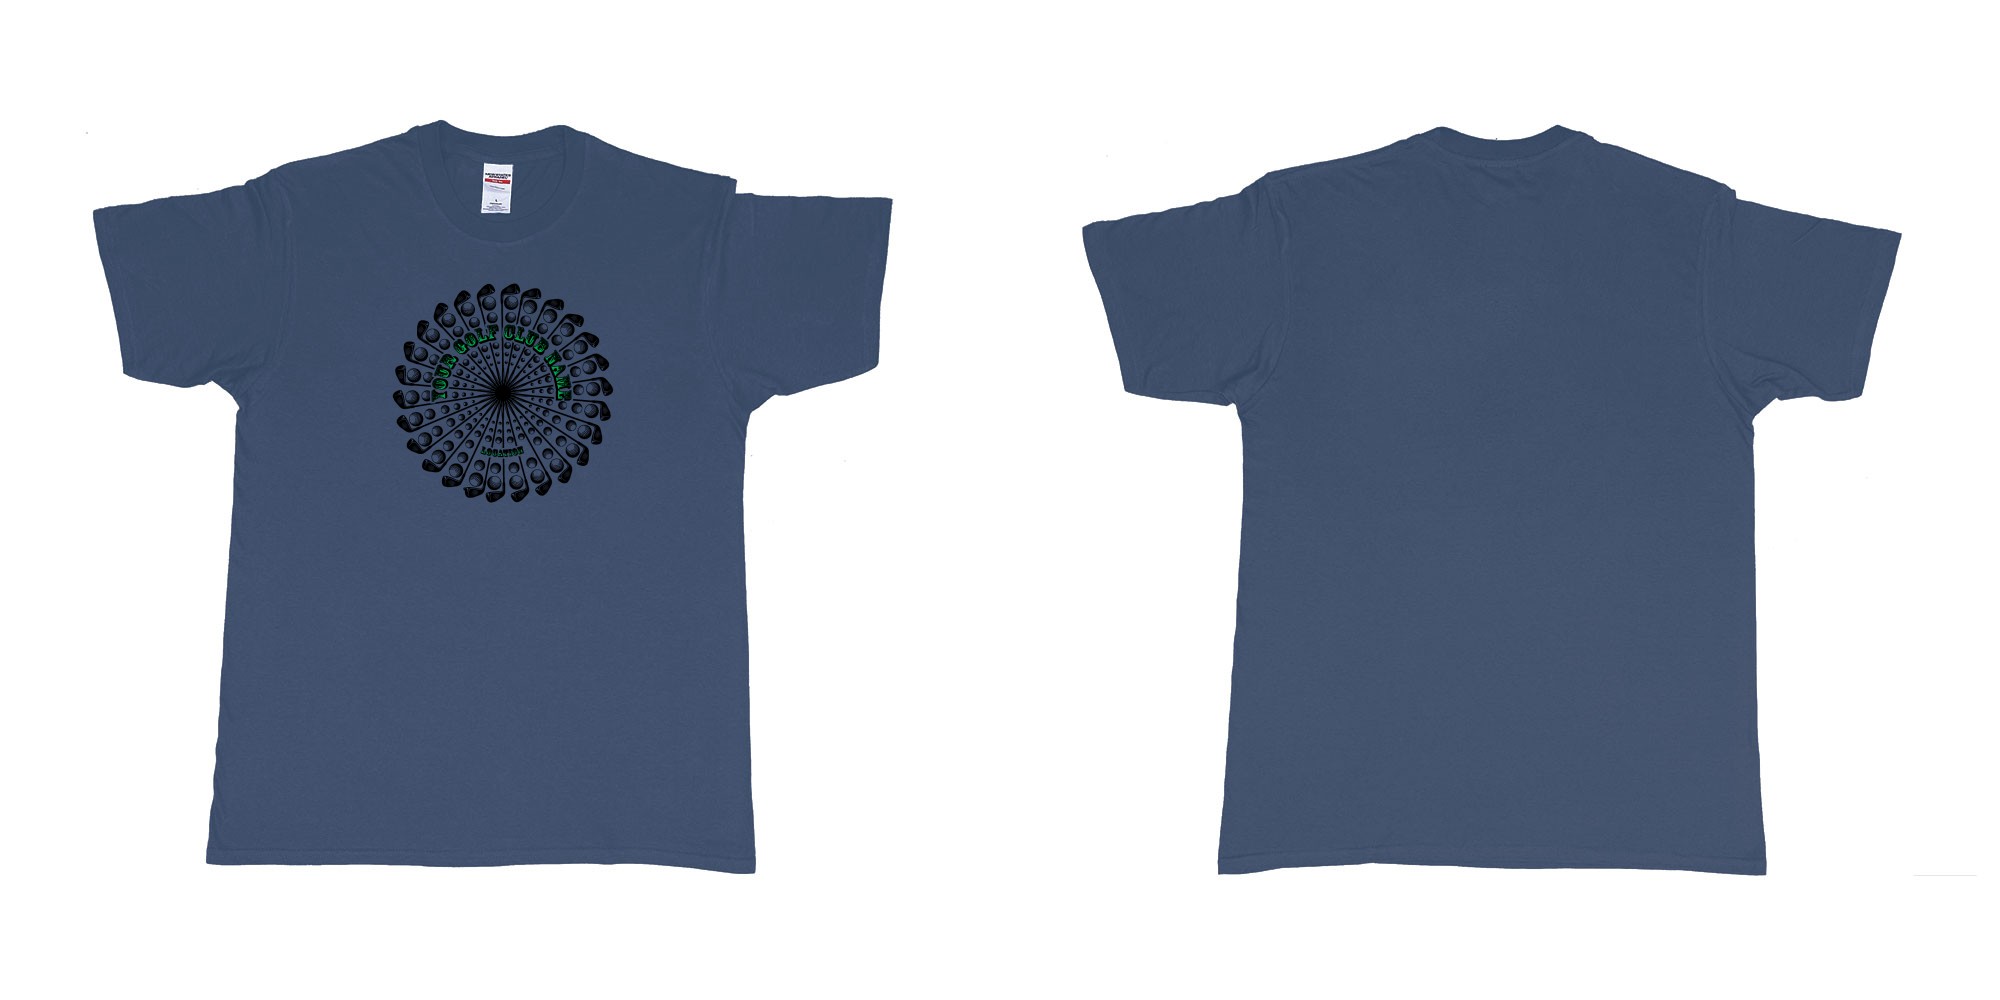 Custom tshirt design golf clubs balls mandala cutoms club name location in fabric color navy choice your own text made in Bali by The Pirate Way